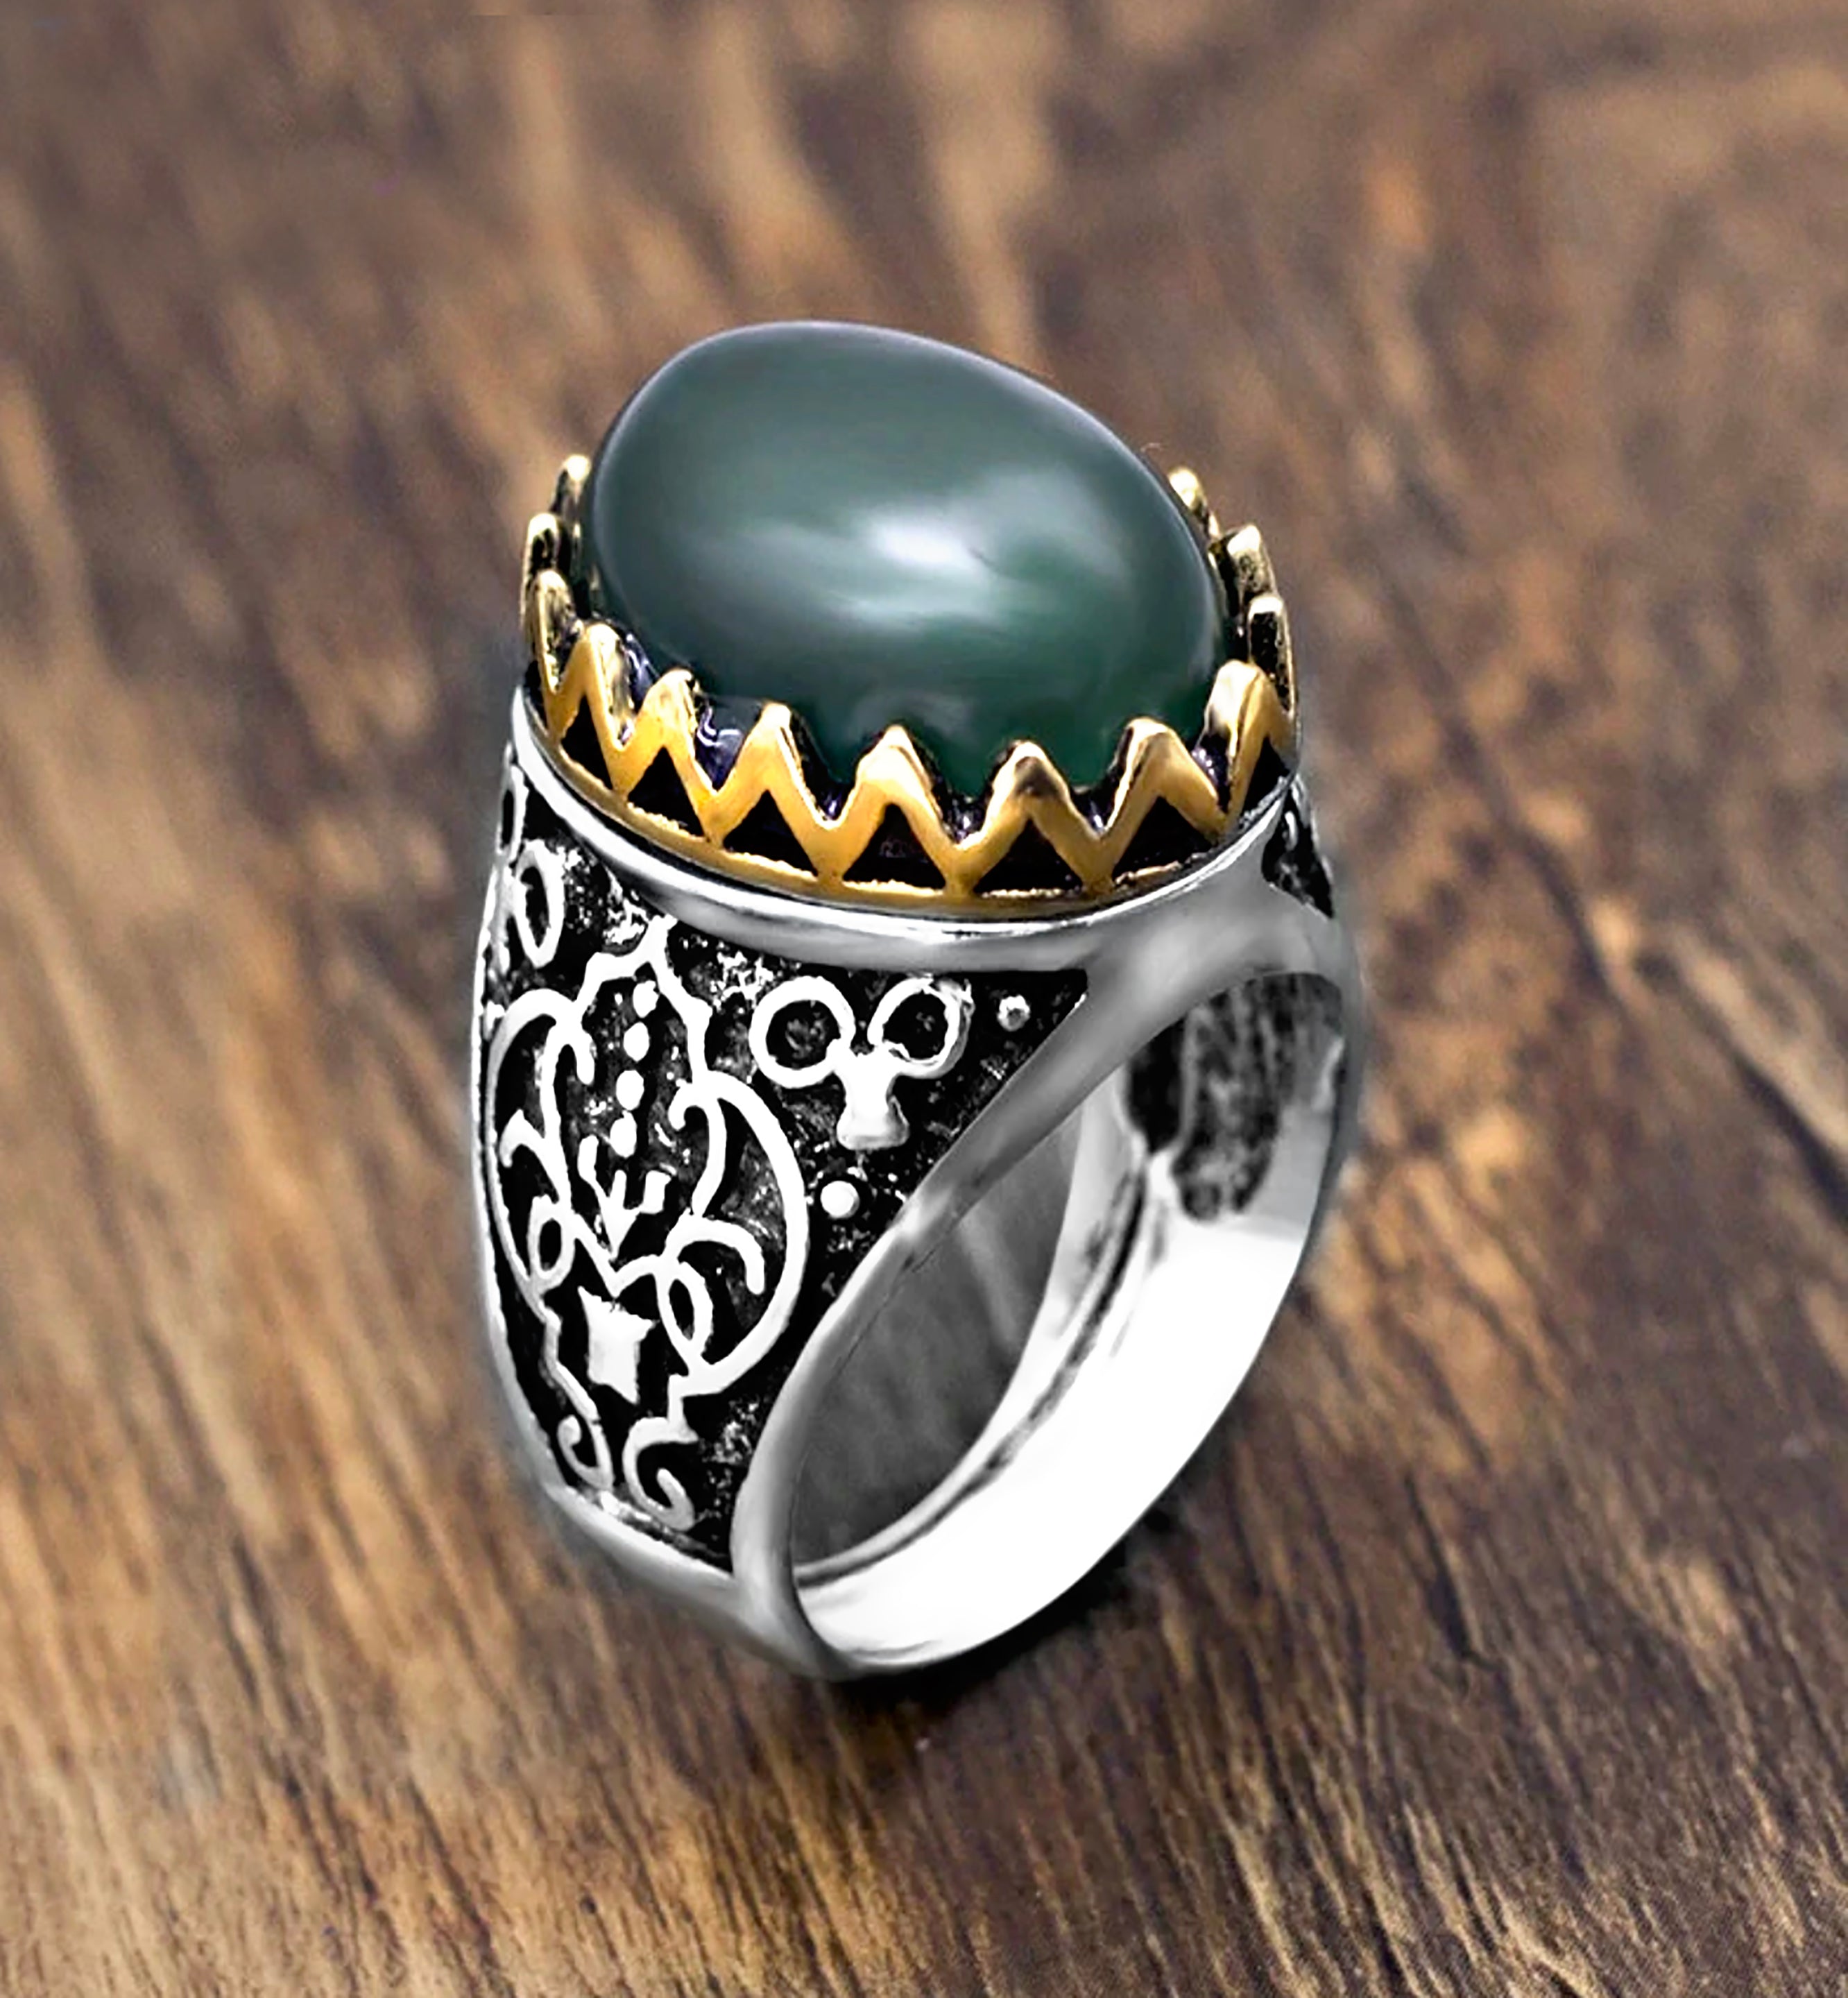 Large Oval Green Stone Ring